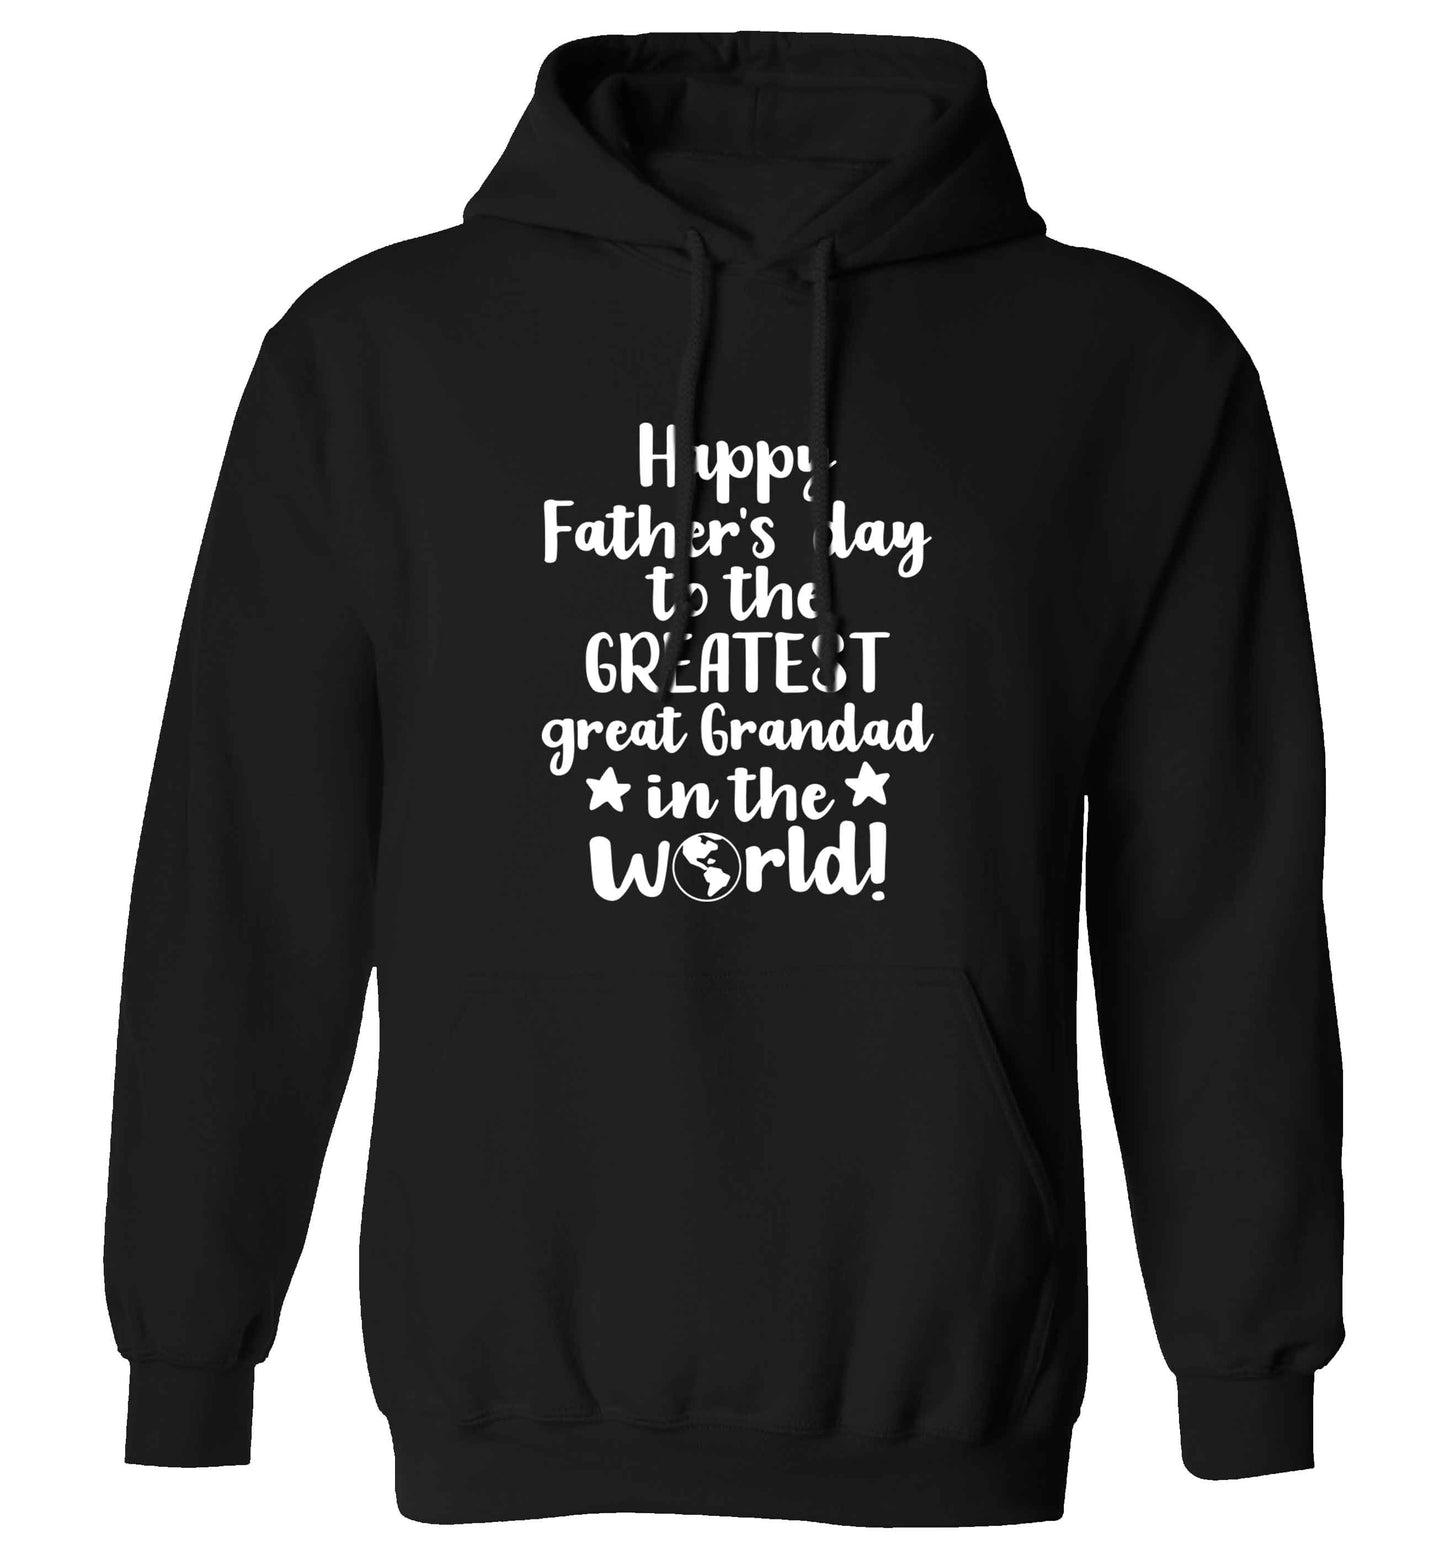 Happy Father's day to the greatest great grandad in the world adults unisex black hoodie 2XL